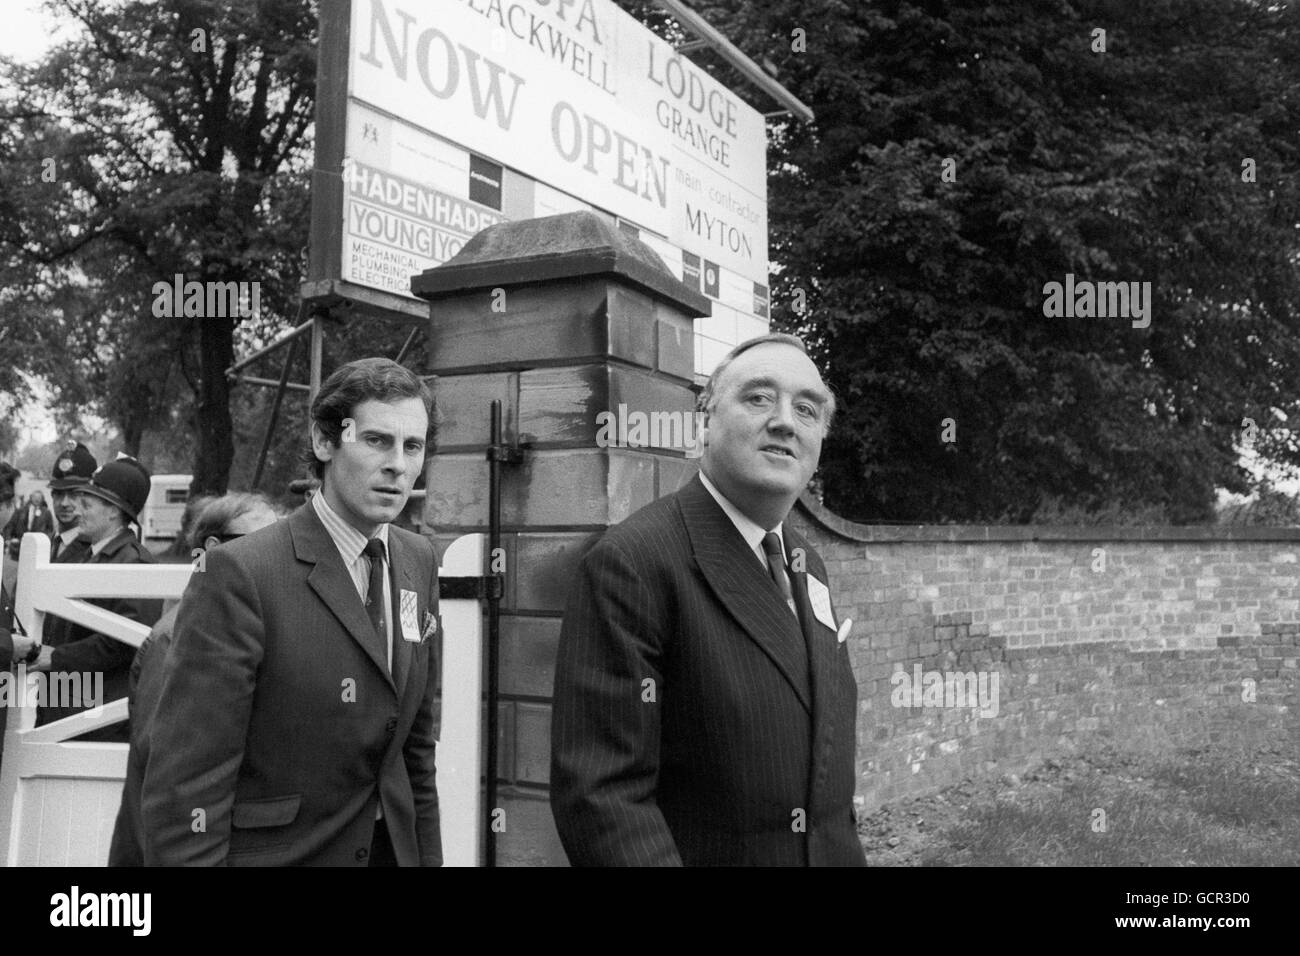 William Whitelaw, right, Northern Ireland Secretary, takes a pre-conference stroll outside the Blackwell Grance Hotel in Darlington. Stock Photo